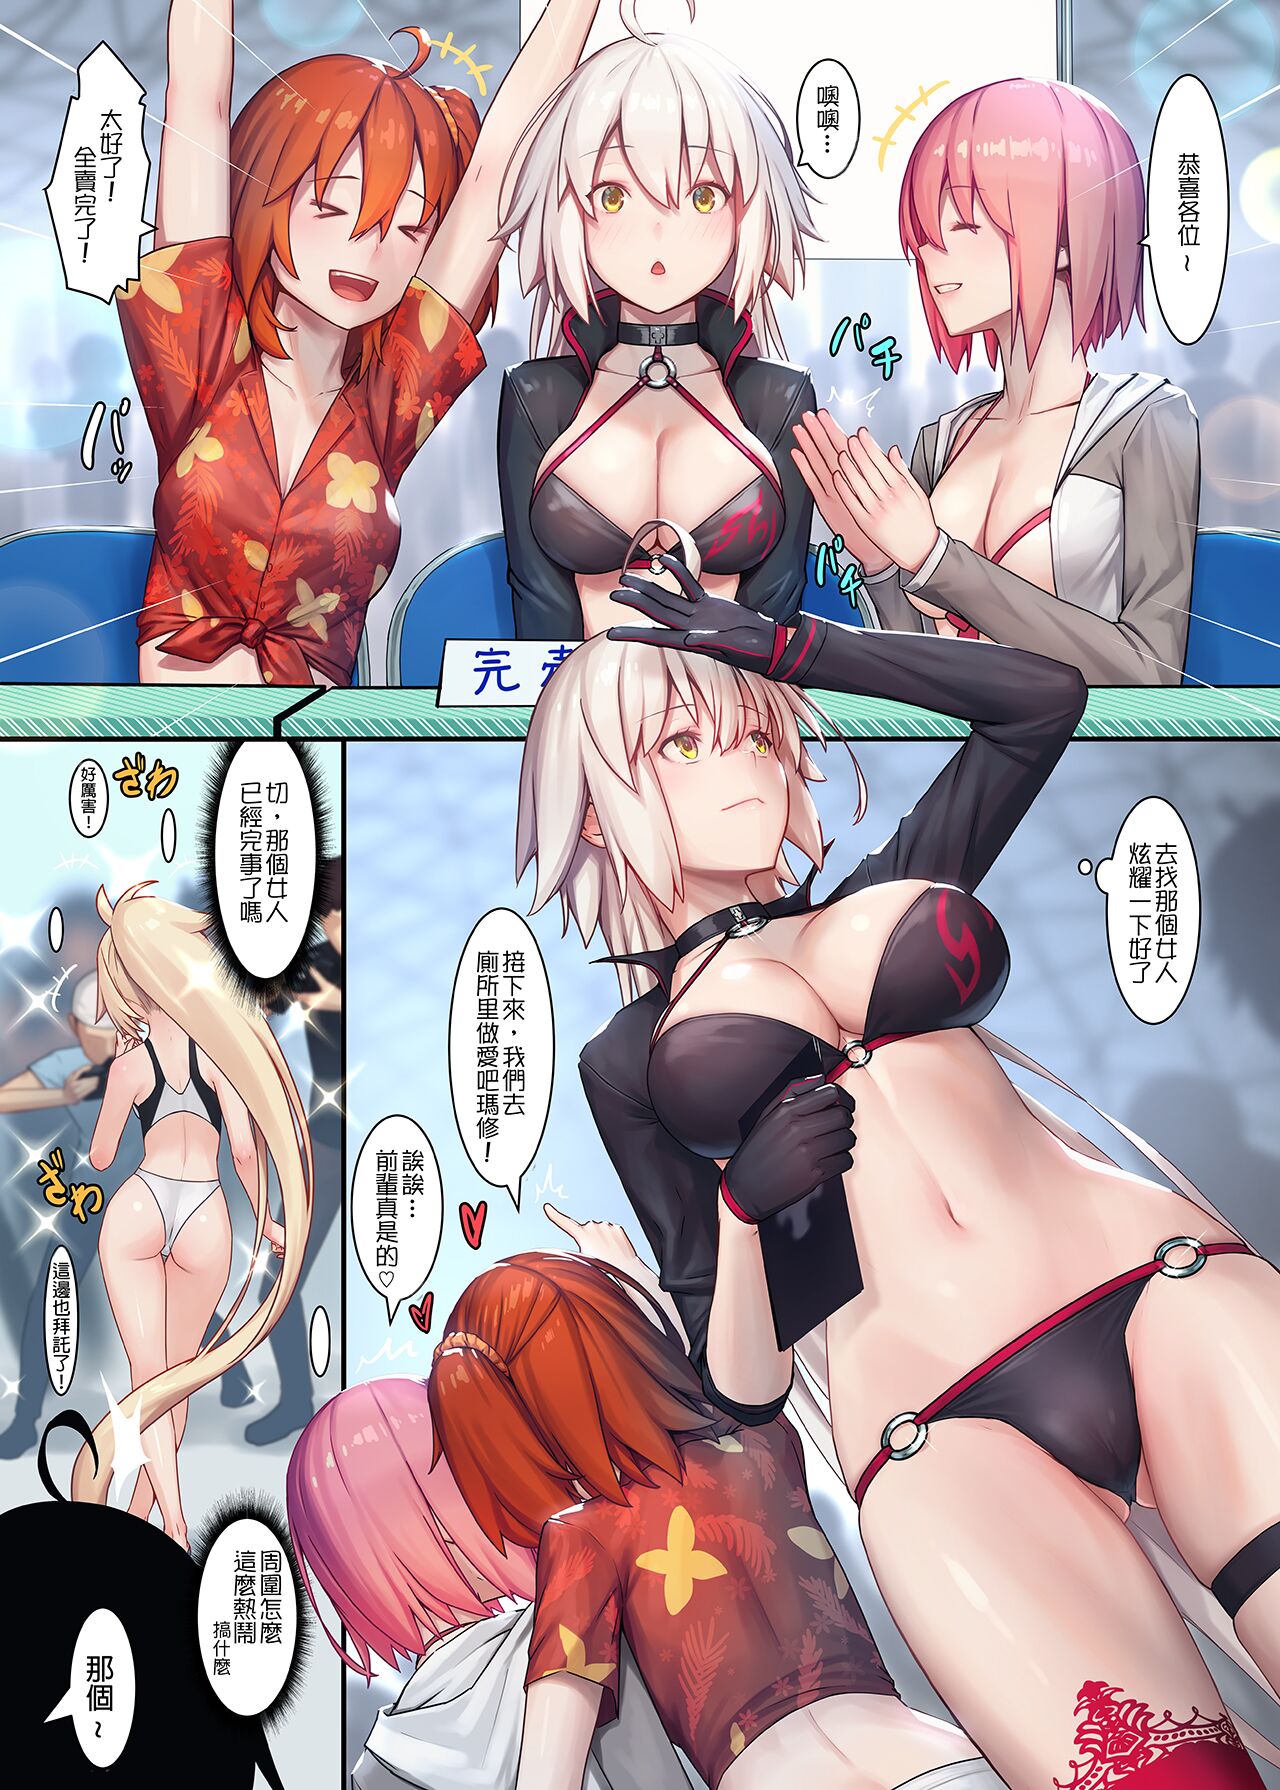 [Kenja Time (MANA)] FATE/GENTLE ORDER 4 "Alter" (Fate/Grand Order) [Chinese] [谜之汉化组X·Alter&无毒気汉化组&reoltora个人重嵌] [Decensored] [Digital] [けんじゃたいむ (MANA)] FATE/GENTLE ORDER 4「オルタ」(Fate/Grand Order) [中国翻訳] [無修正] [DL版]